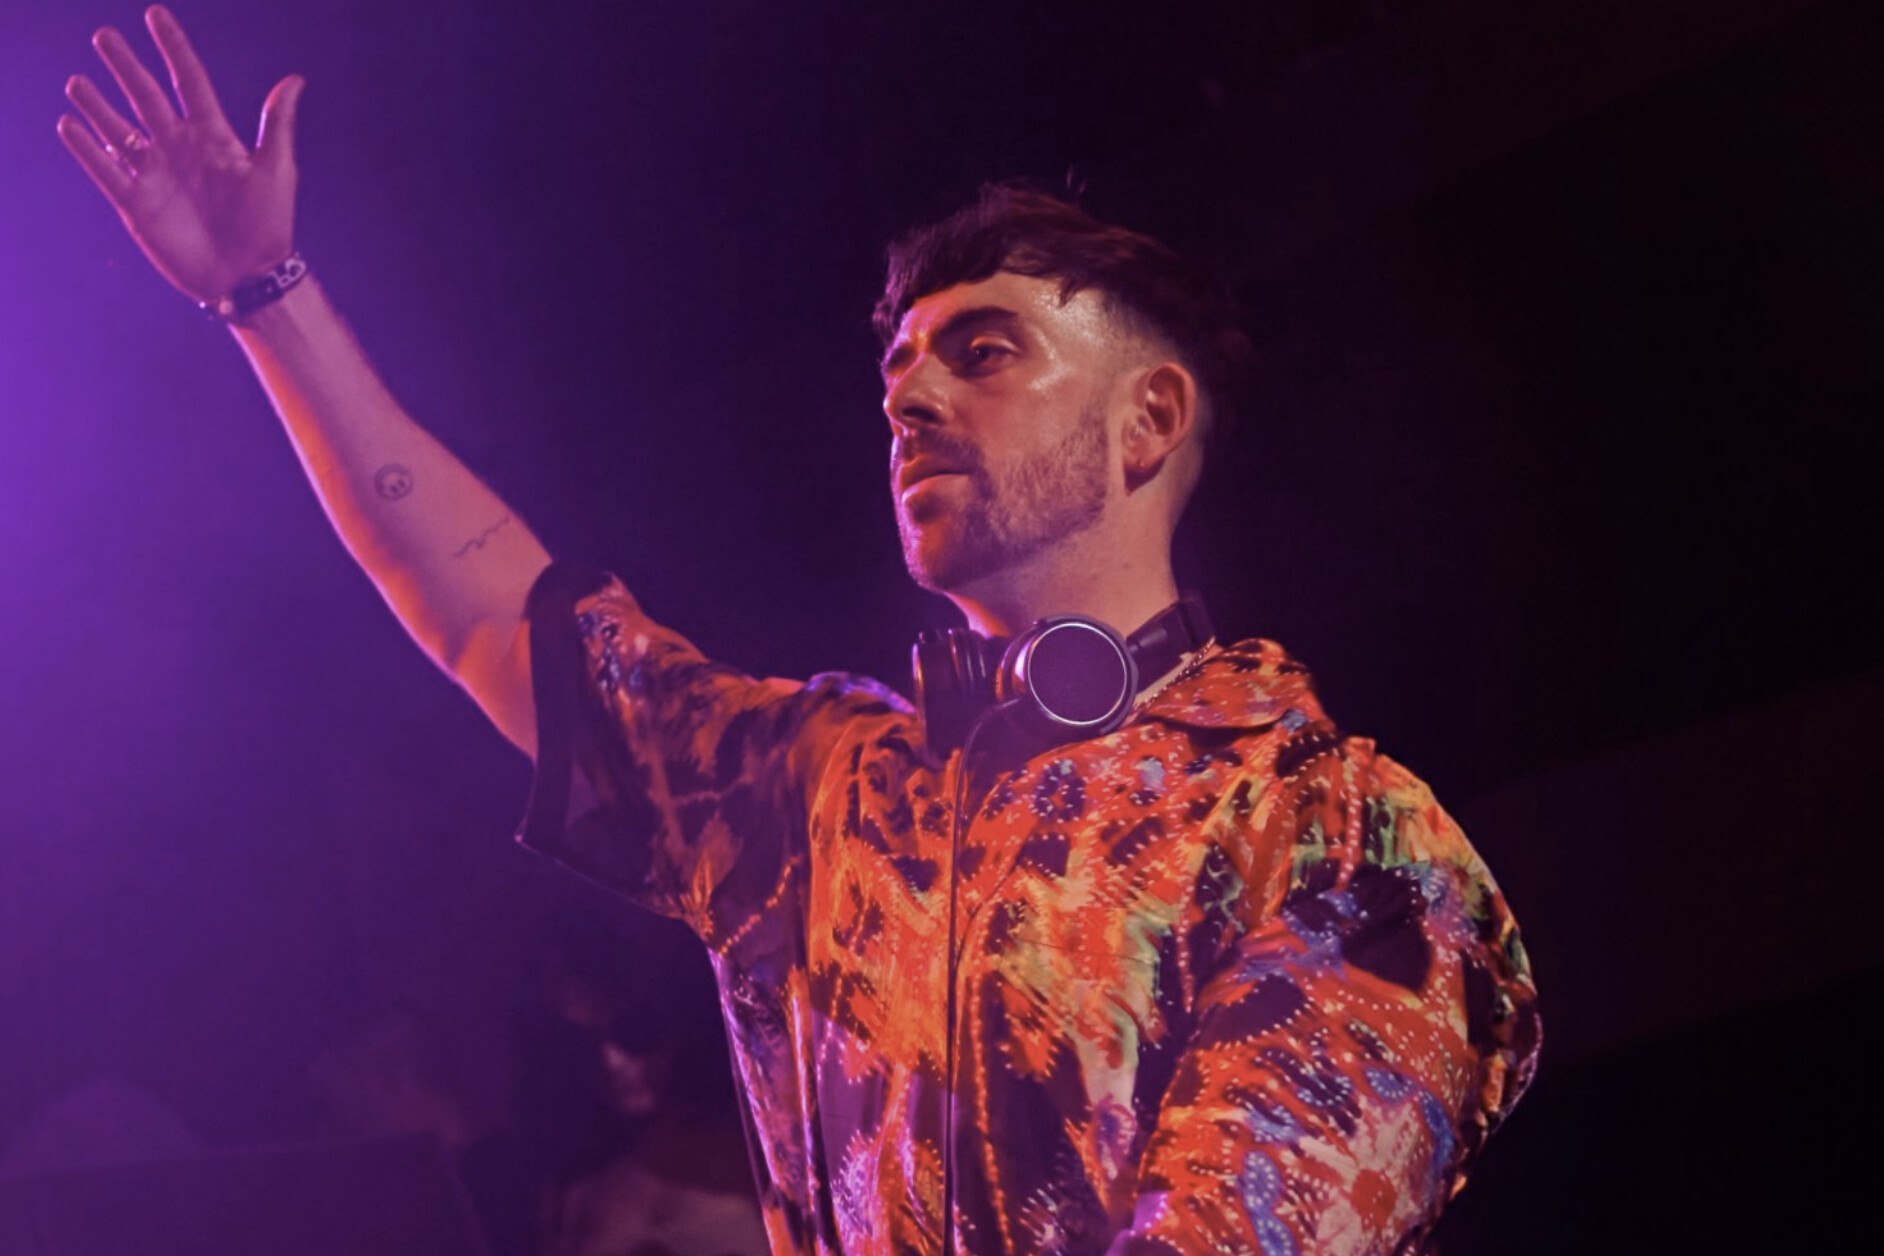 Patrick Topping Steps In for FISHER: A Four-Week Residency Switch at Hï Ibiza